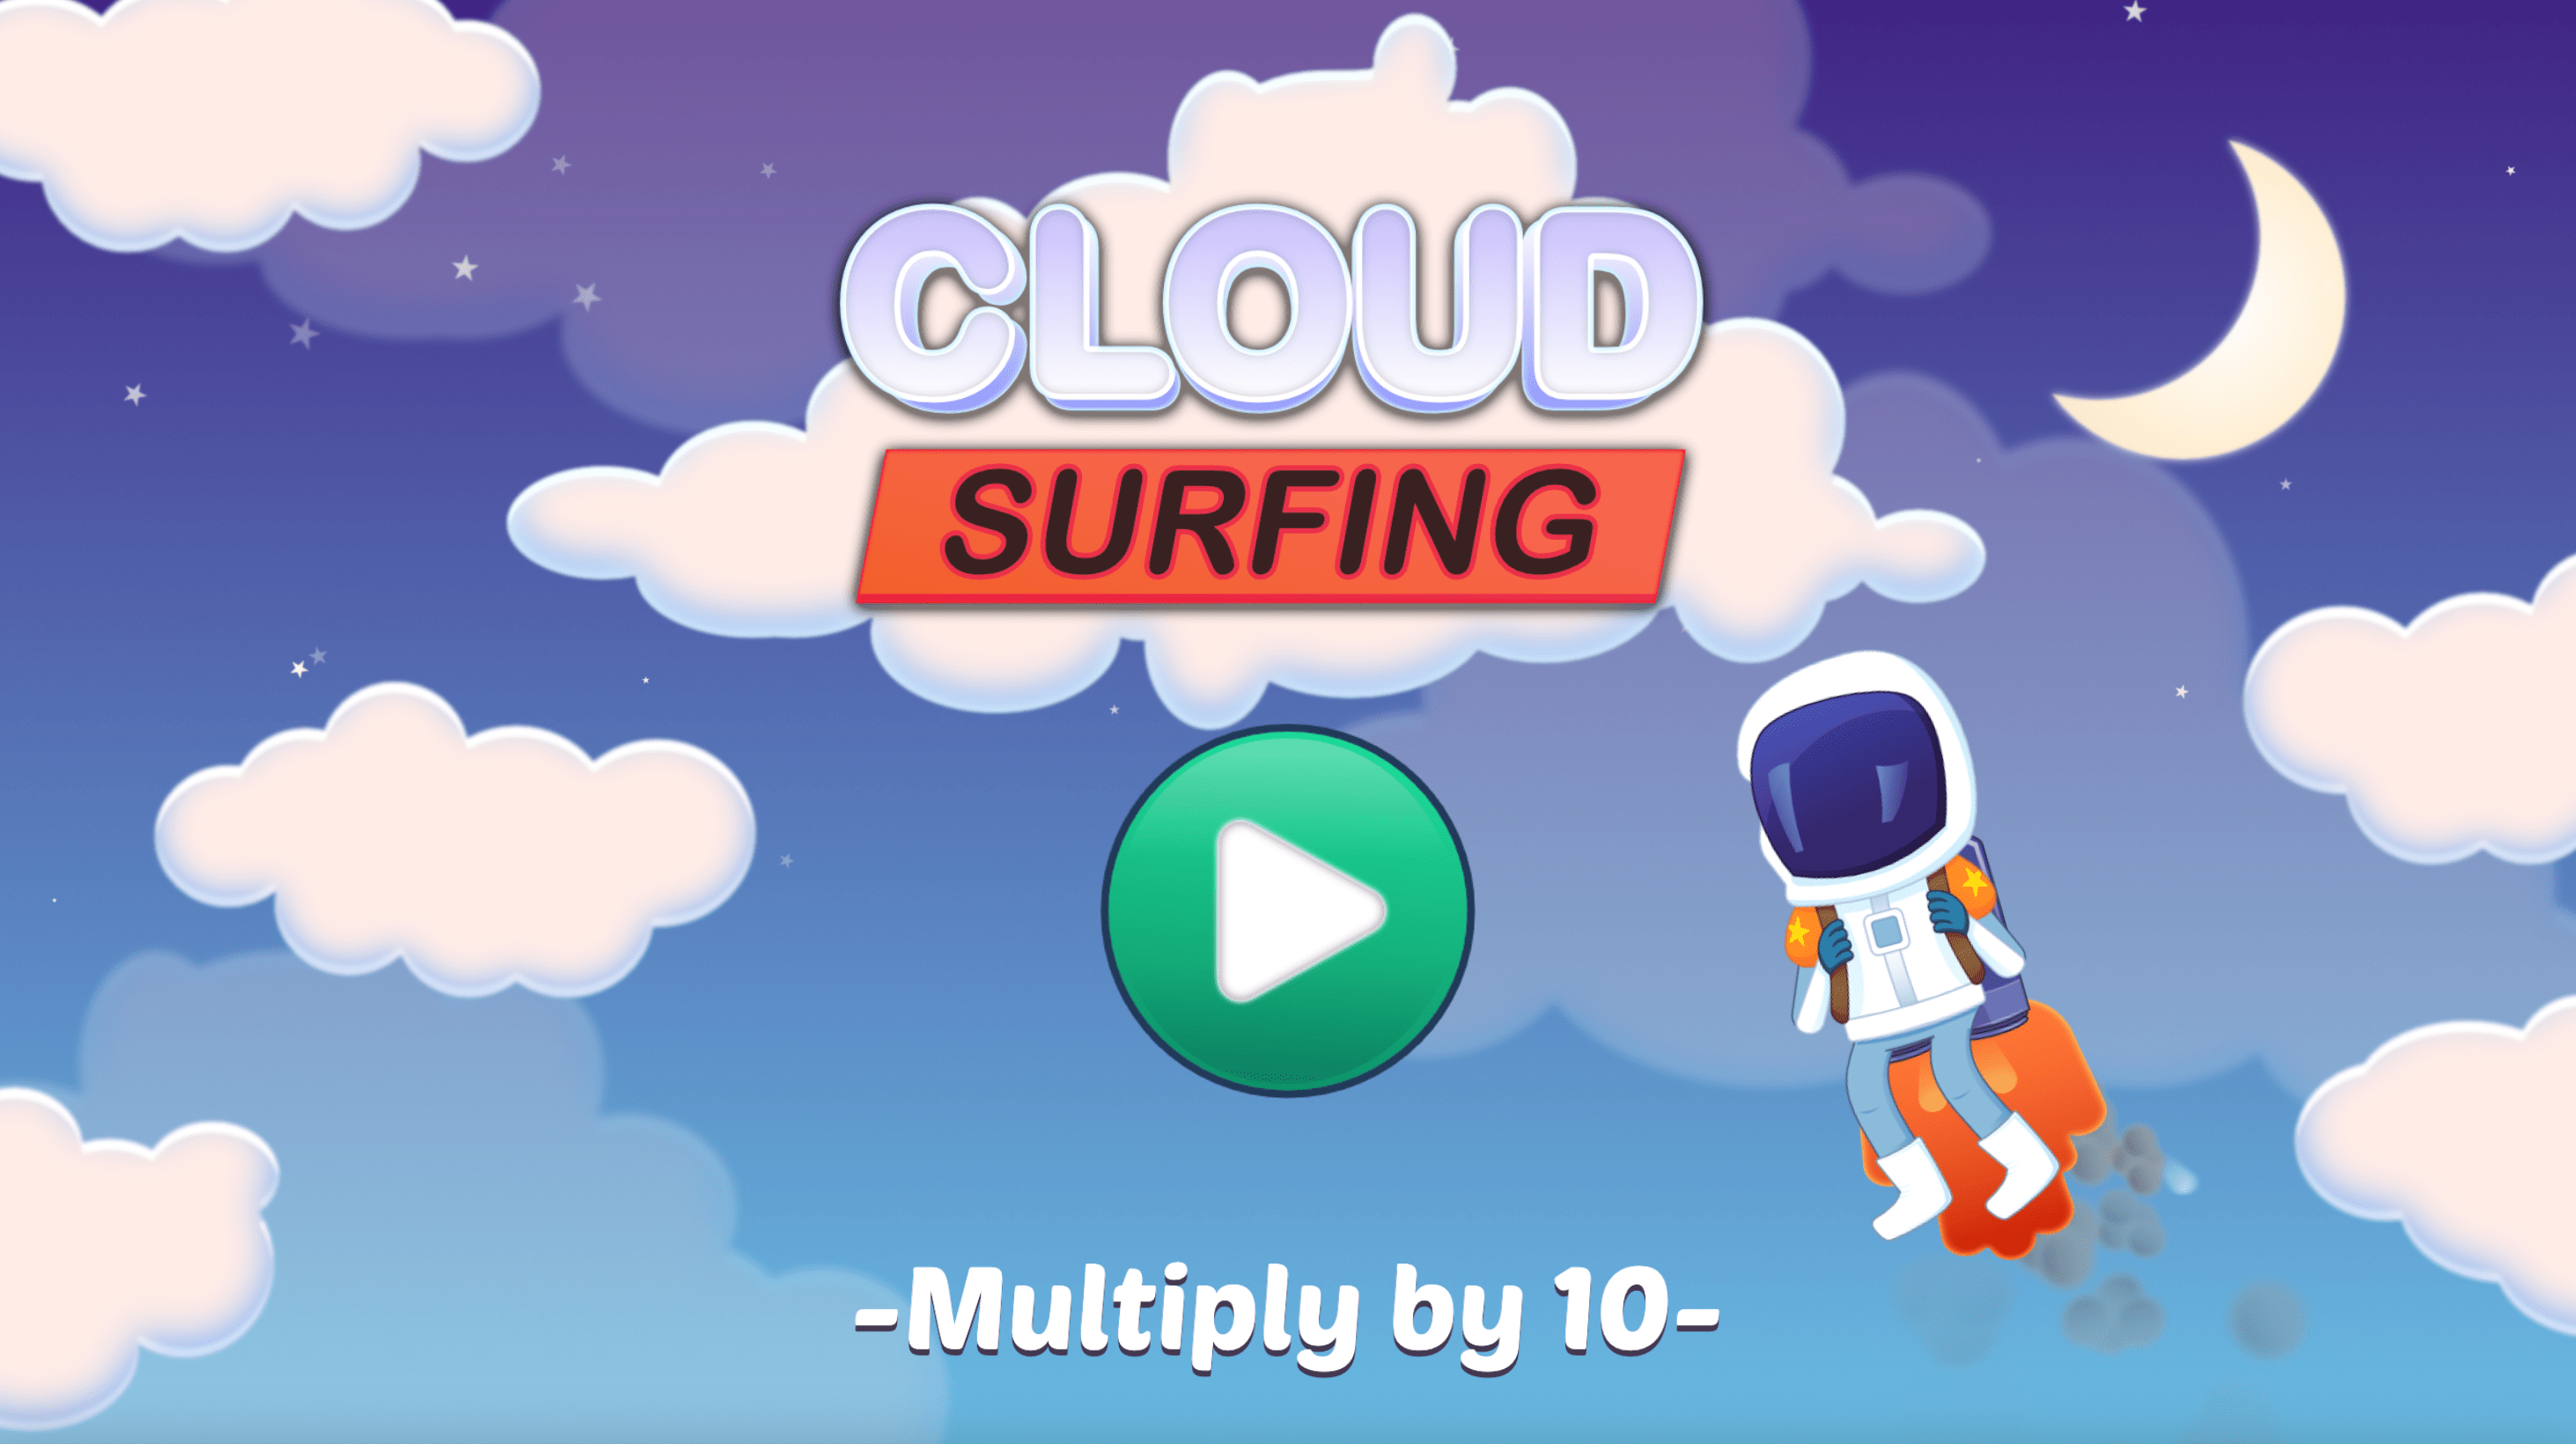 Cloud Surfing Multiply by 10 game